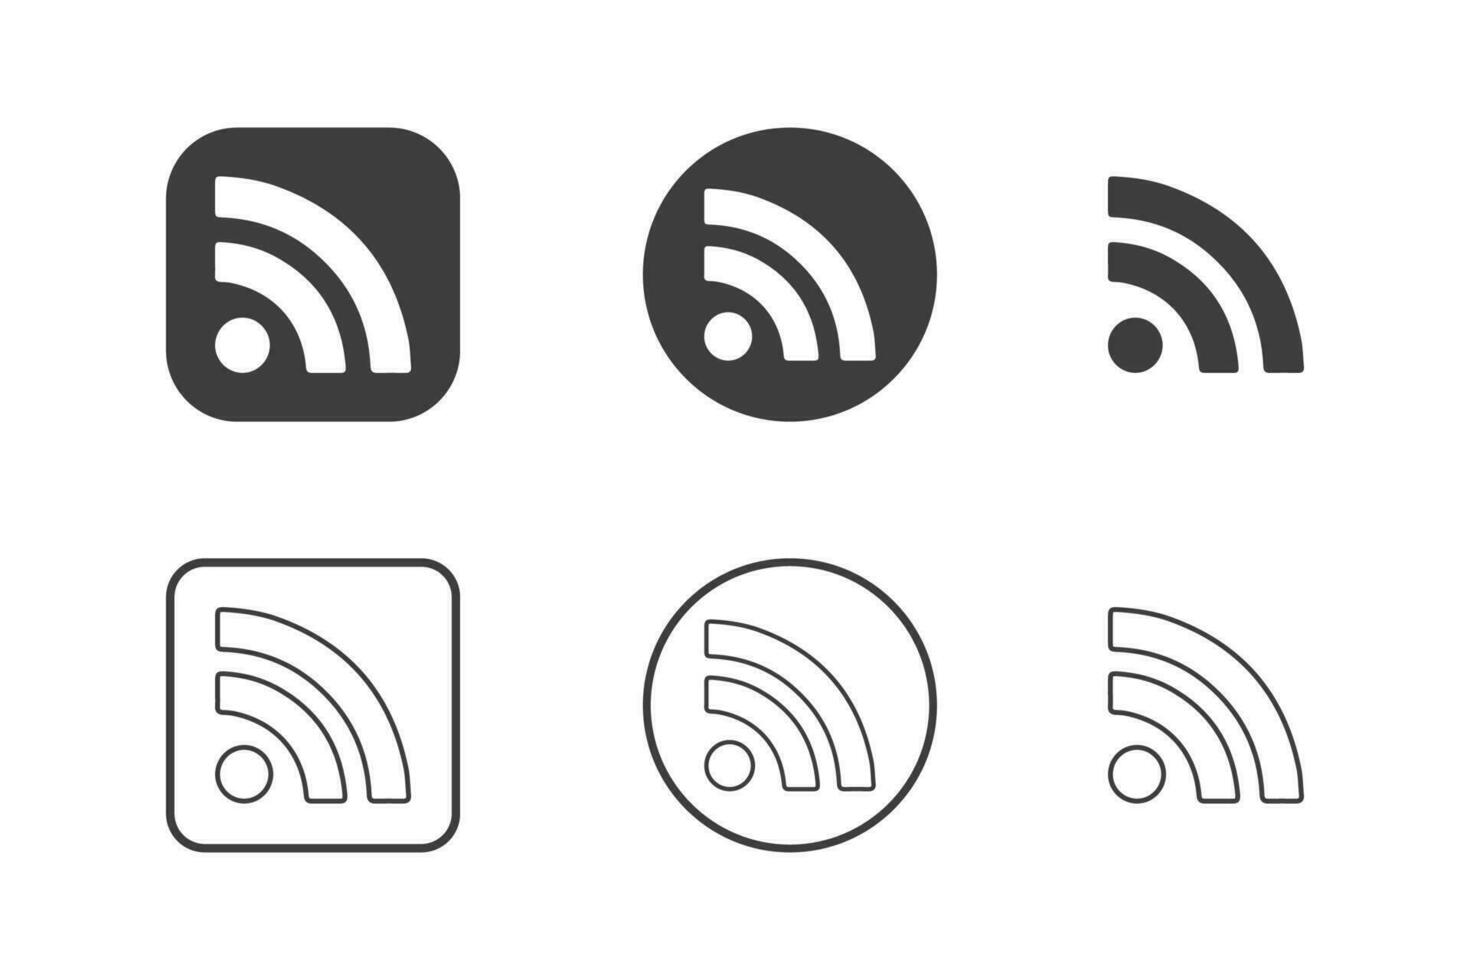 Wifi icon design 6 variations. Isolated on white background. vector